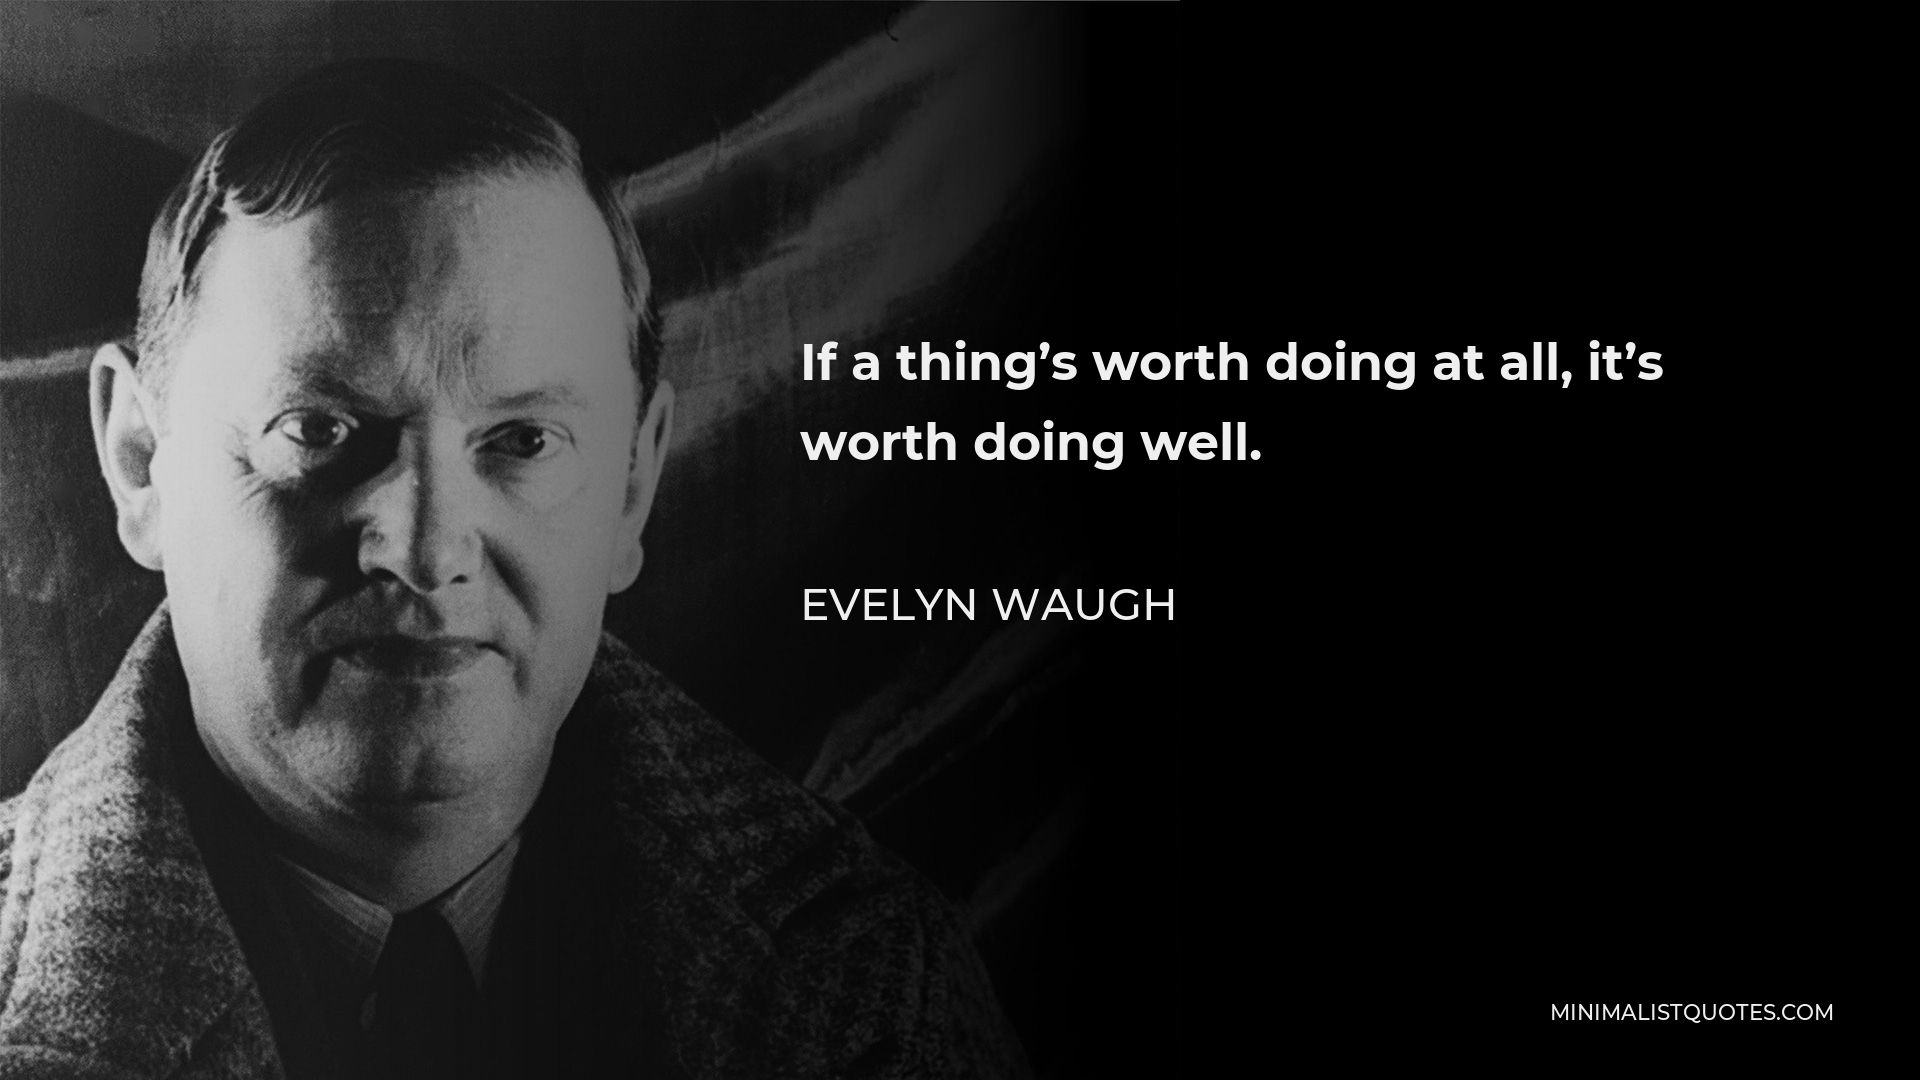 Evelyn Waugh Quote - If a thing’s worth doing at all, it’s worth doing well.